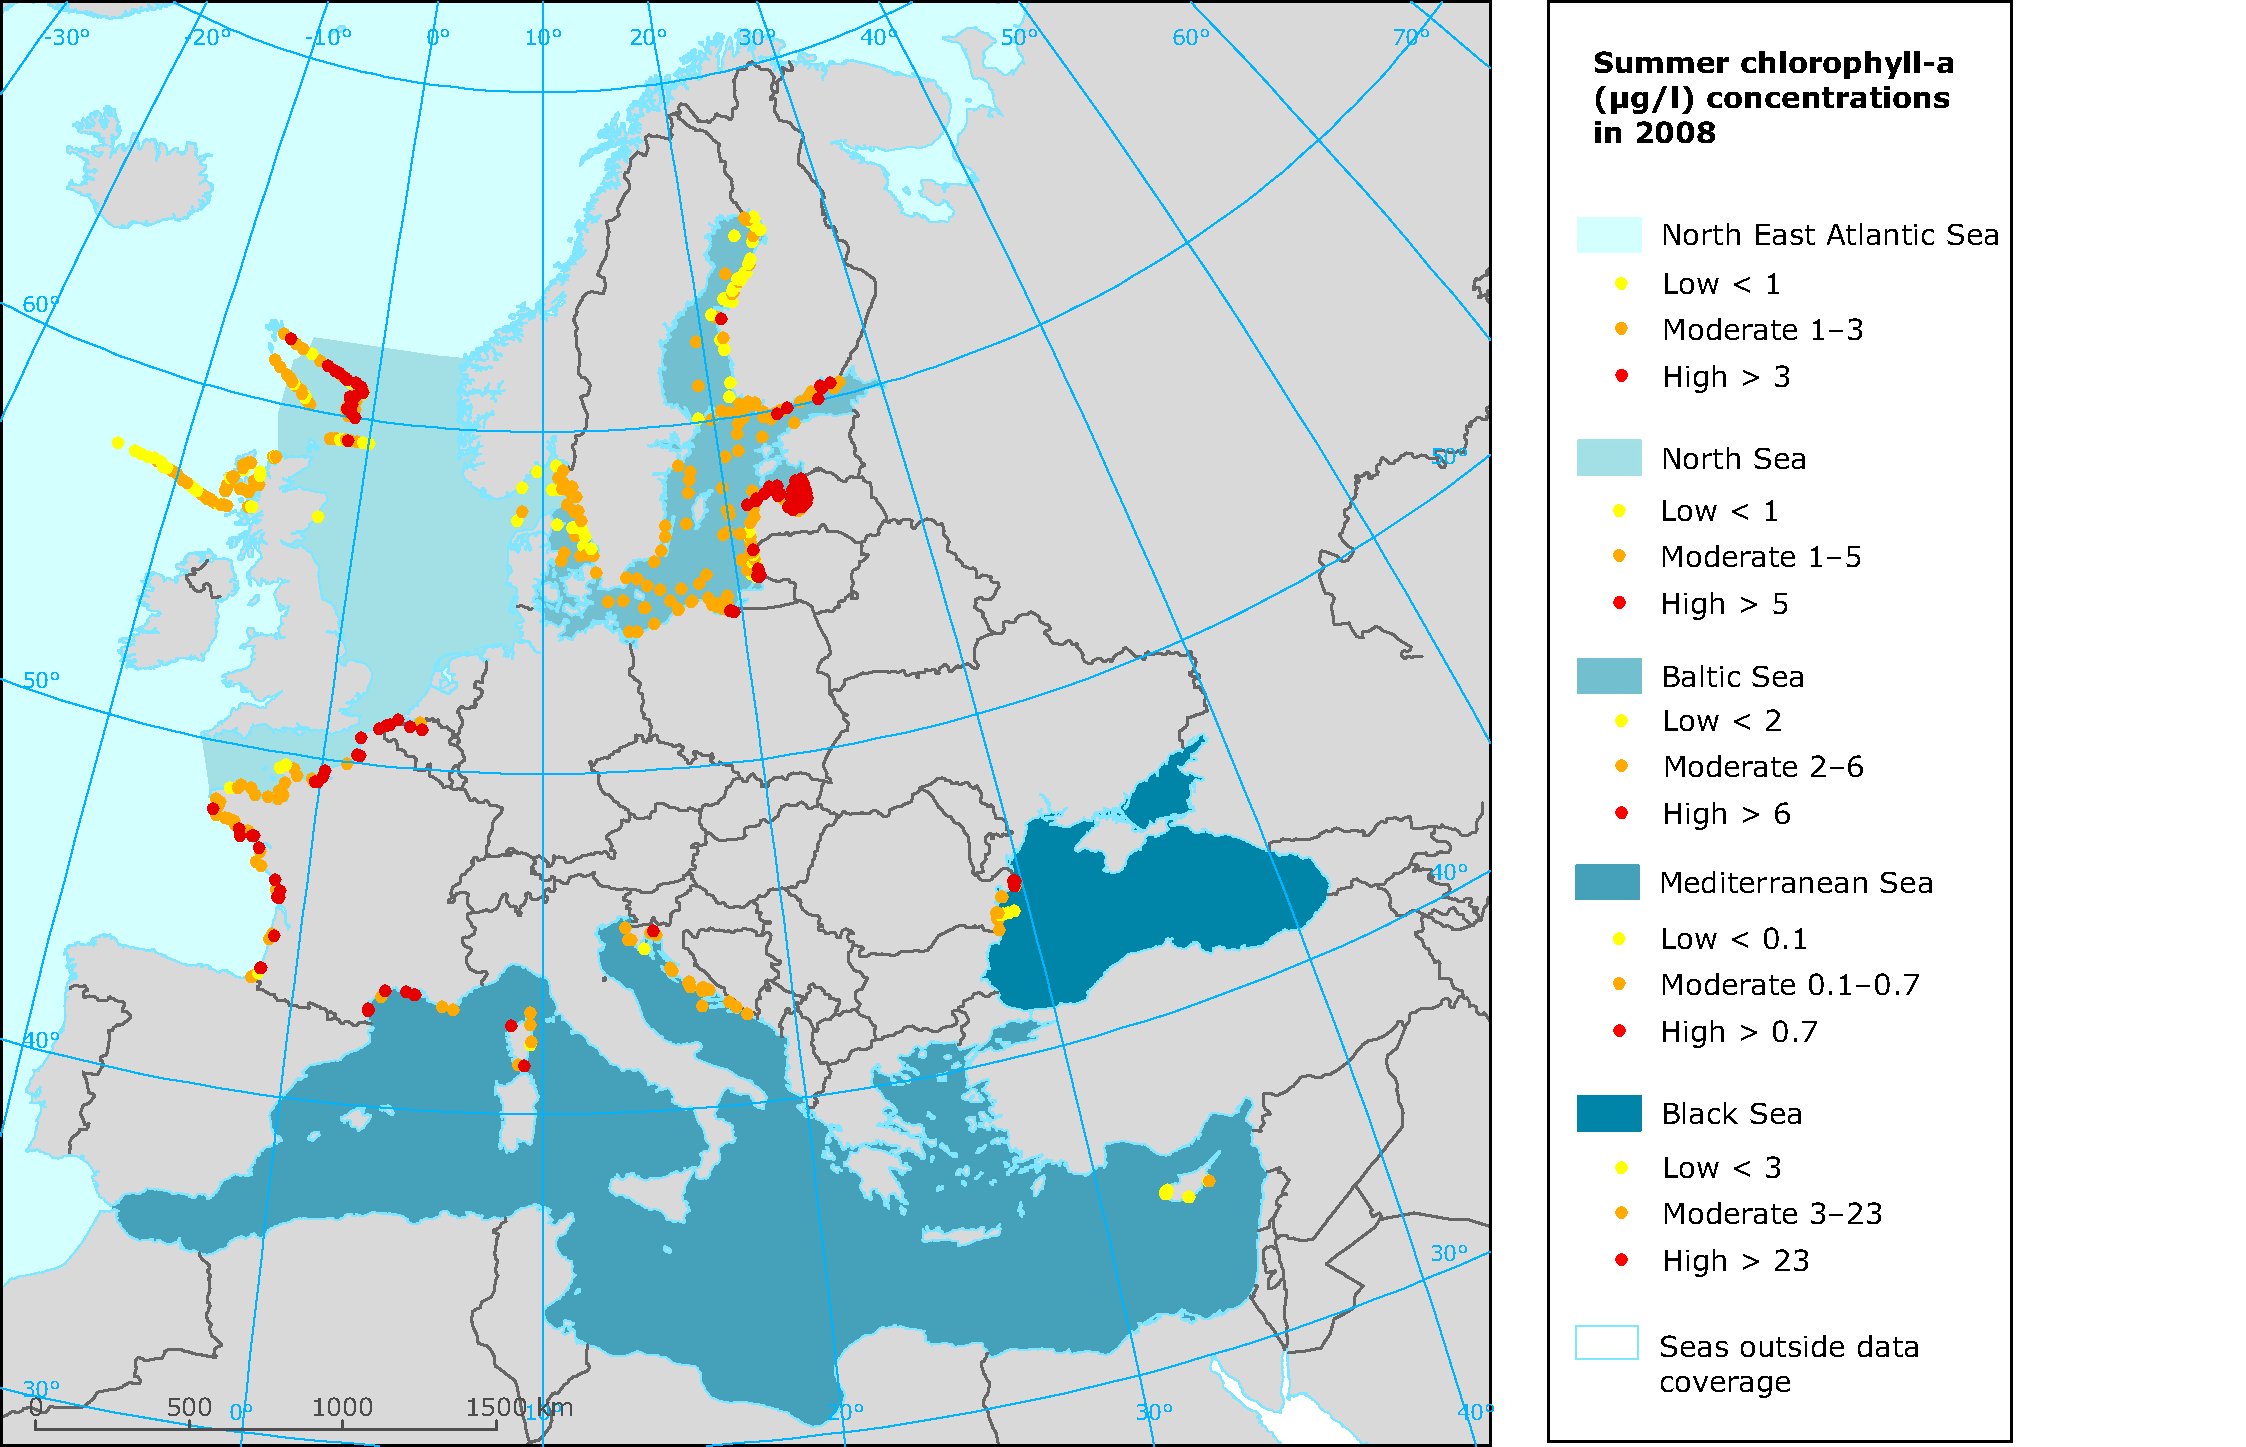 Chlorophyll-a concentrations in European seas, 2008